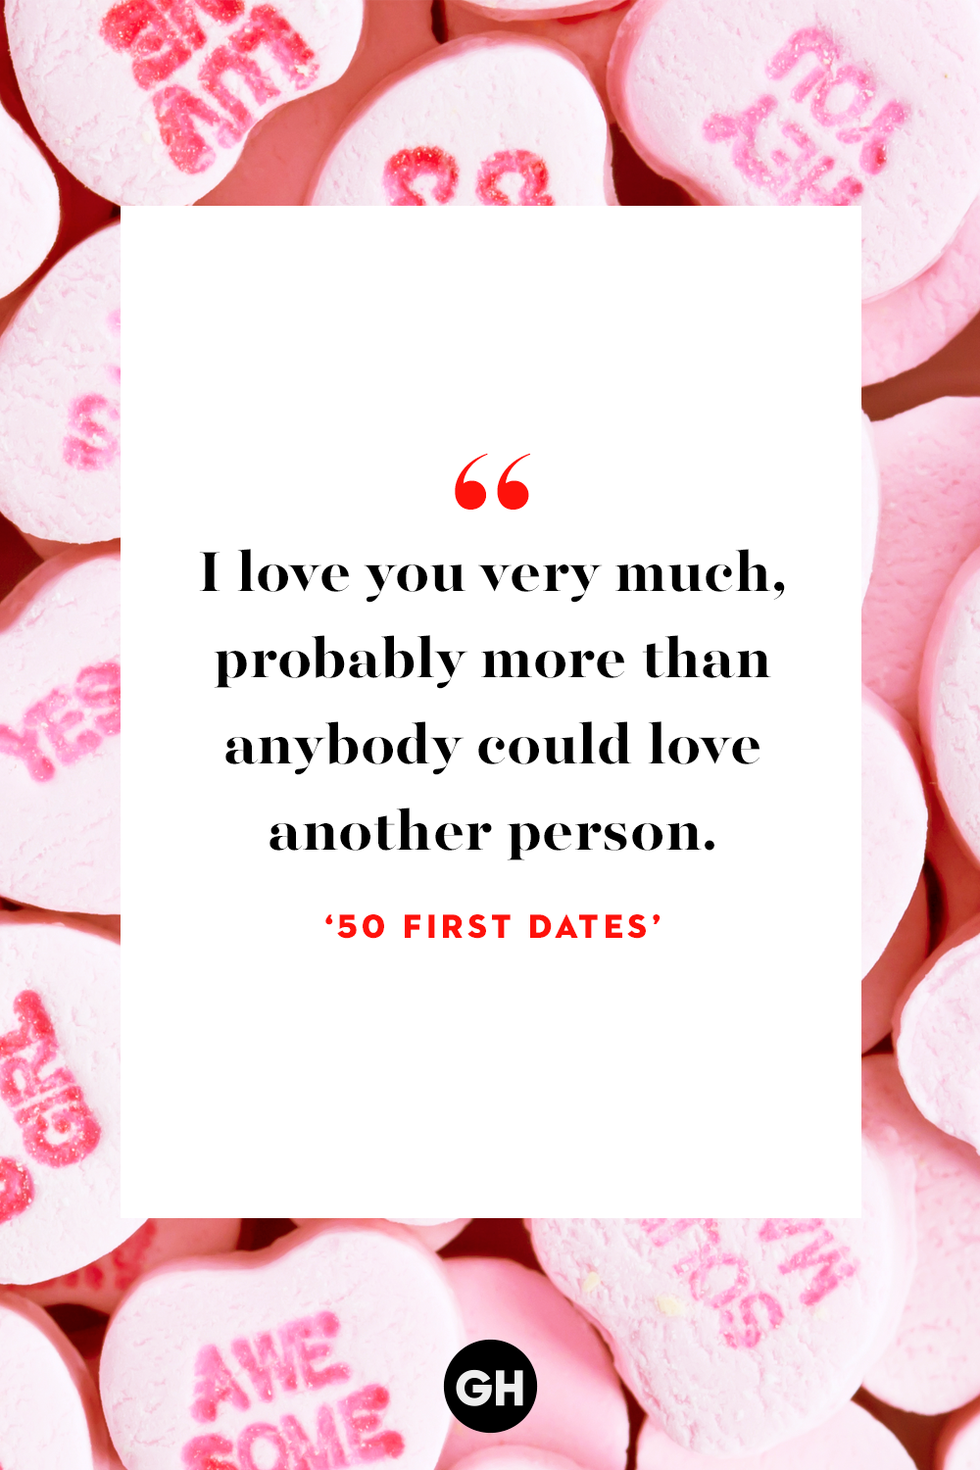 Cute Sayings for Valentine's Day